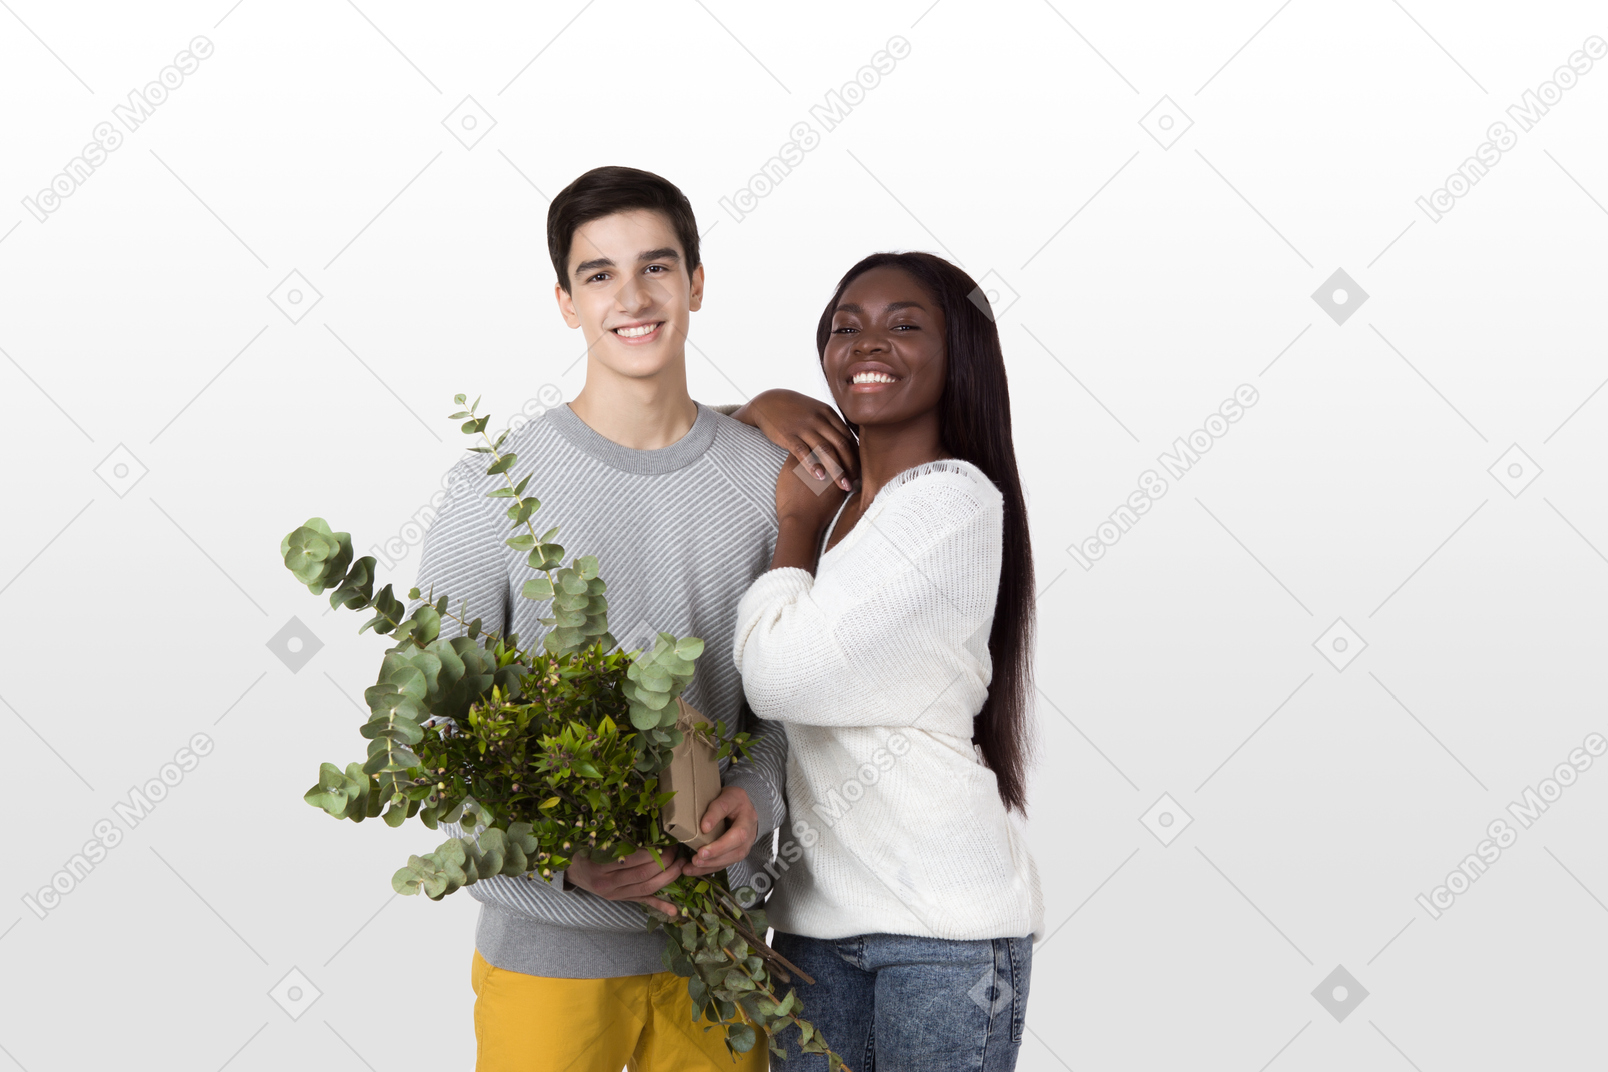 Interracial couple: white man and black woman